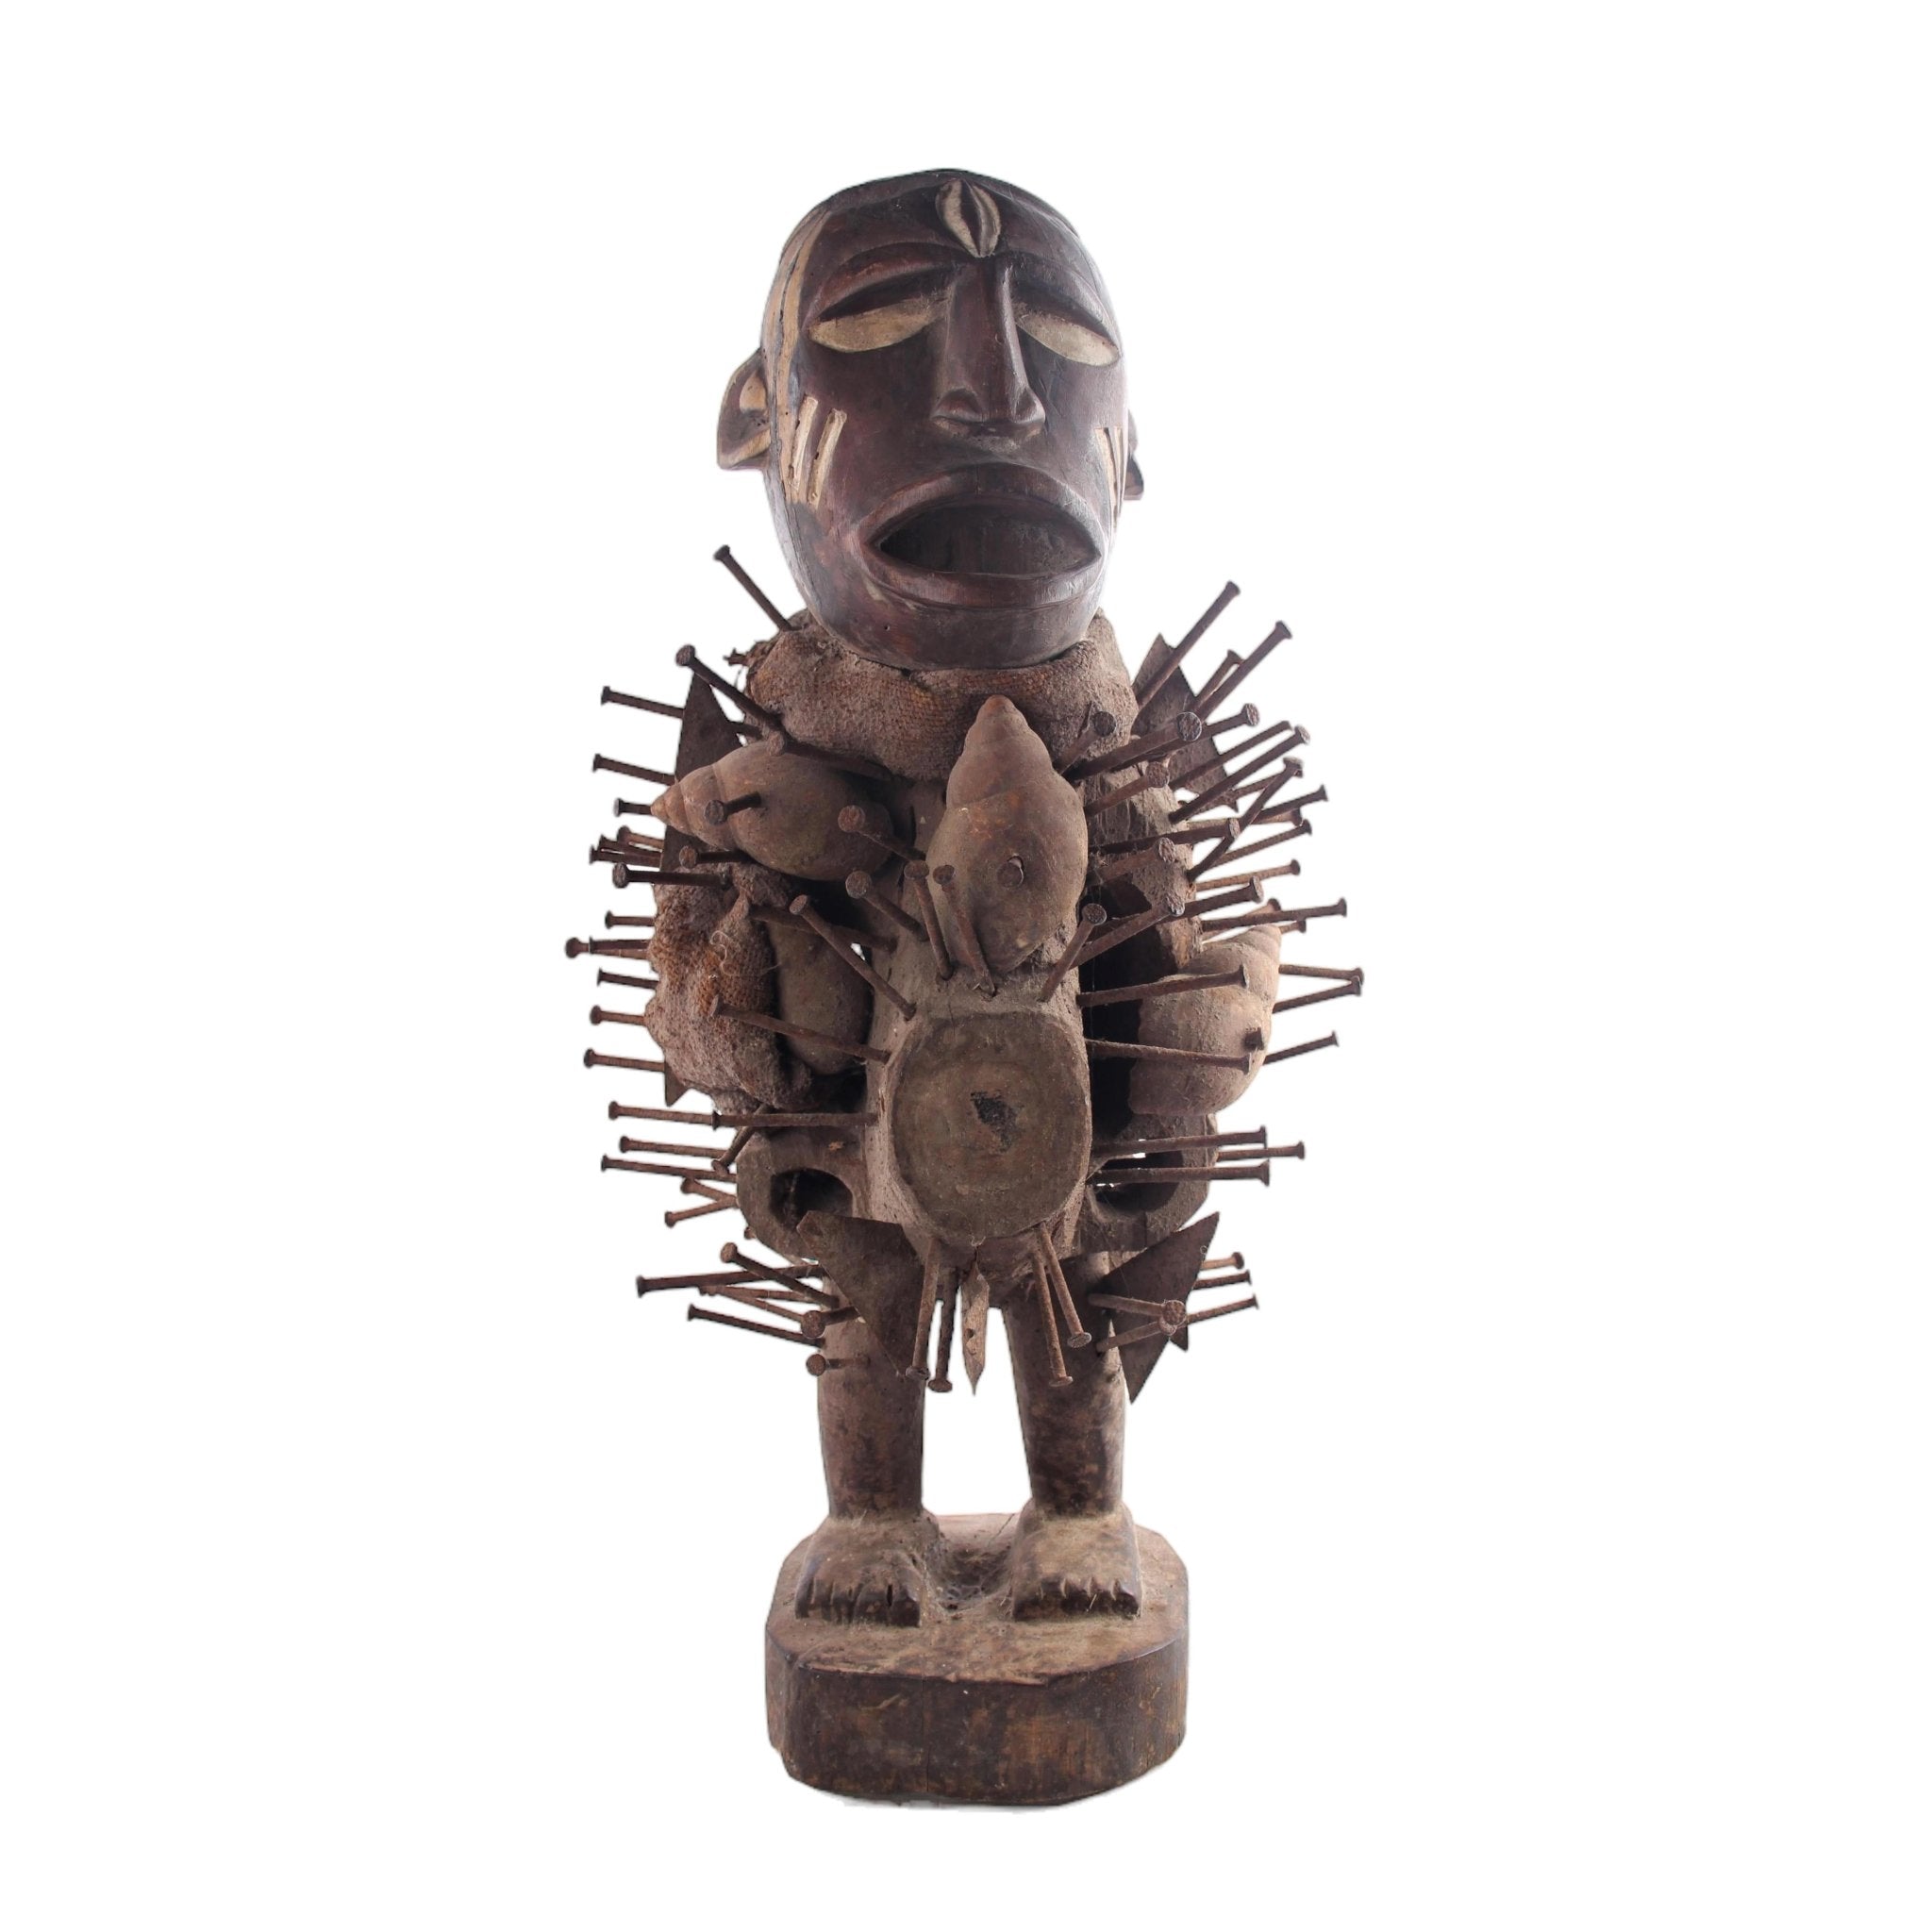 Bakongo Tribe Fetishes ~25.6" Tall - African Angel Art